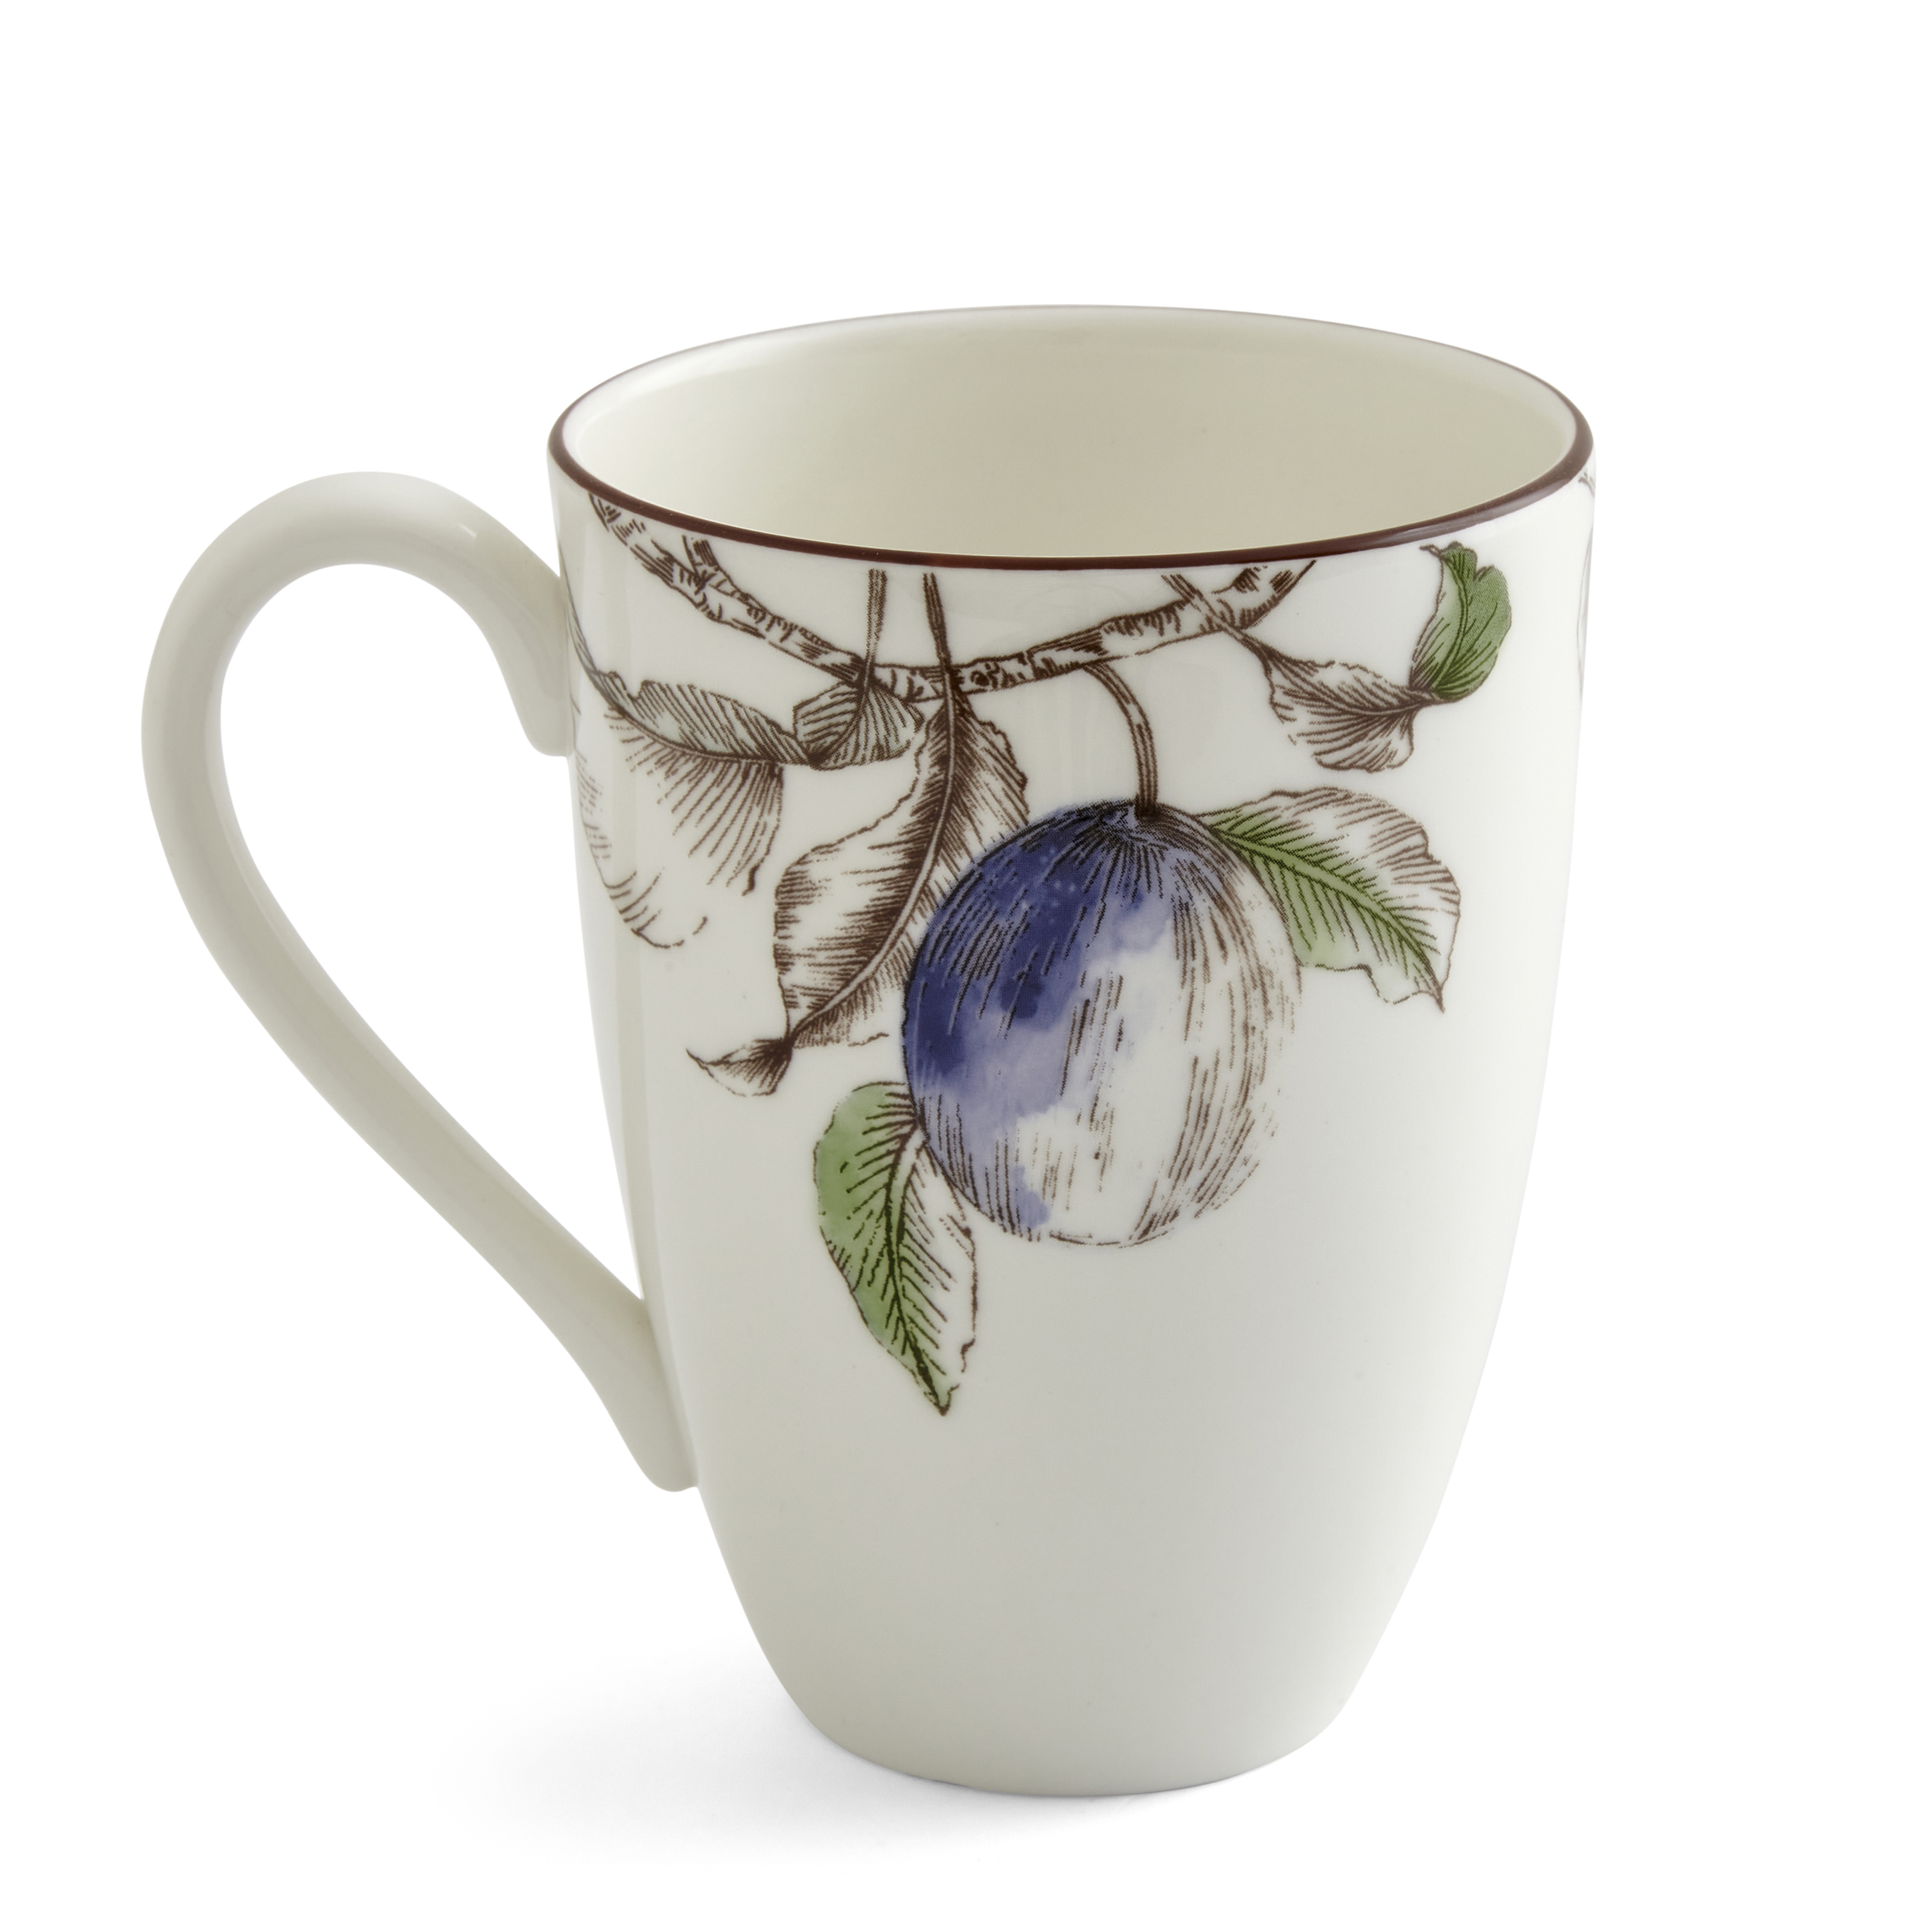 Nature's Bounty 17 Ounce Mug (Plum) image number null